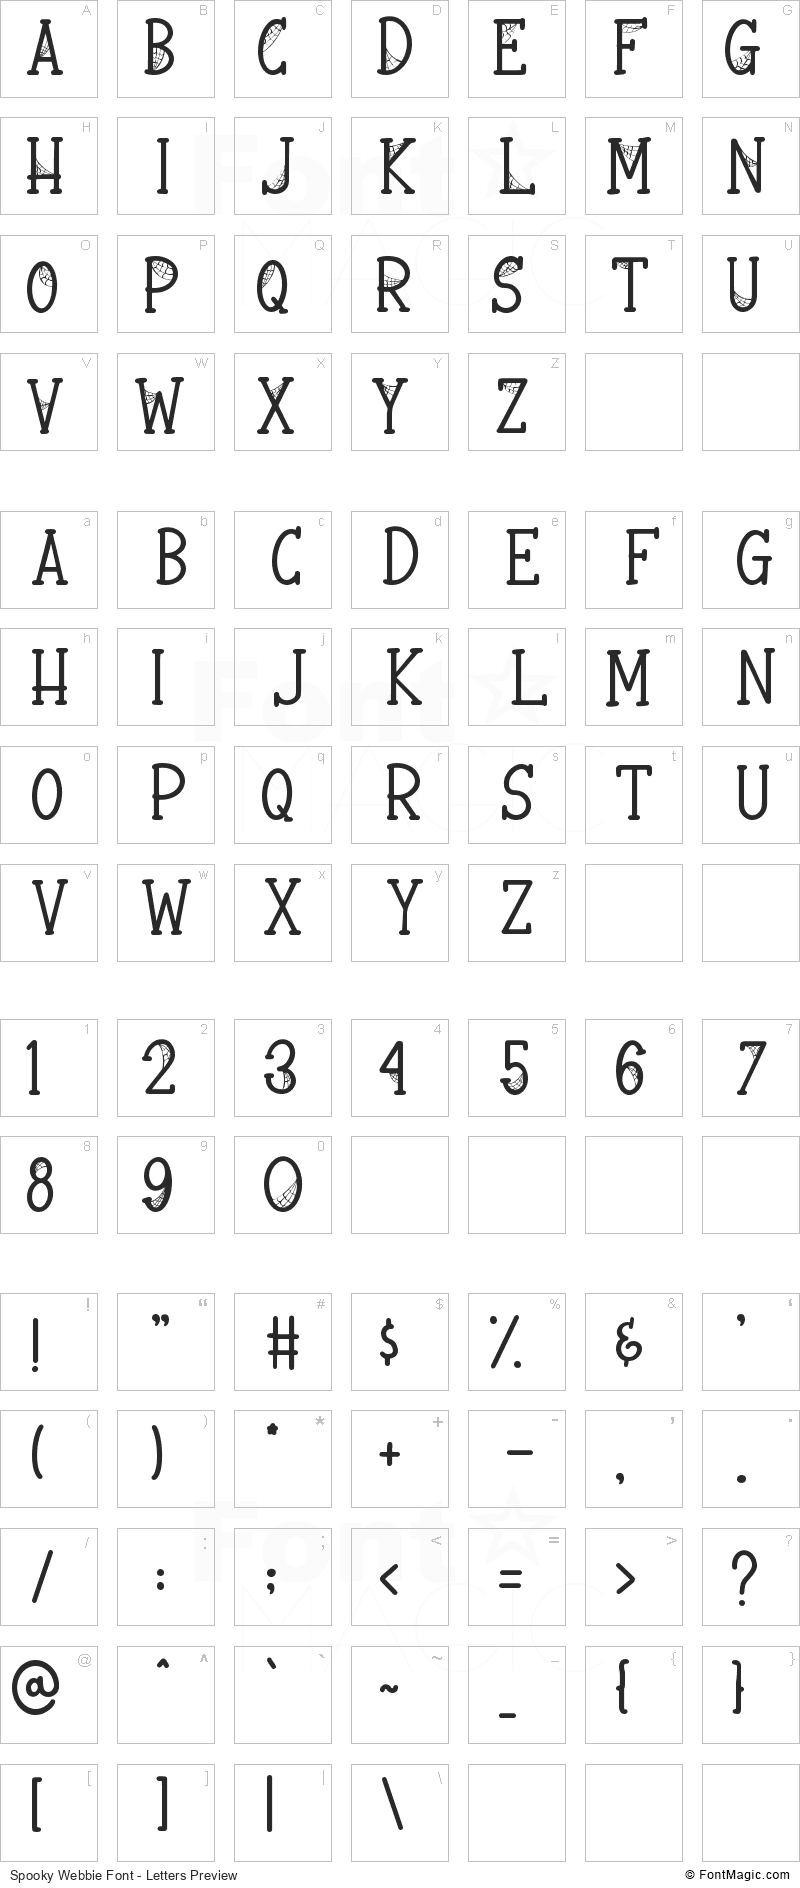 Spooky Webbie Font - All Latters Preview Chart